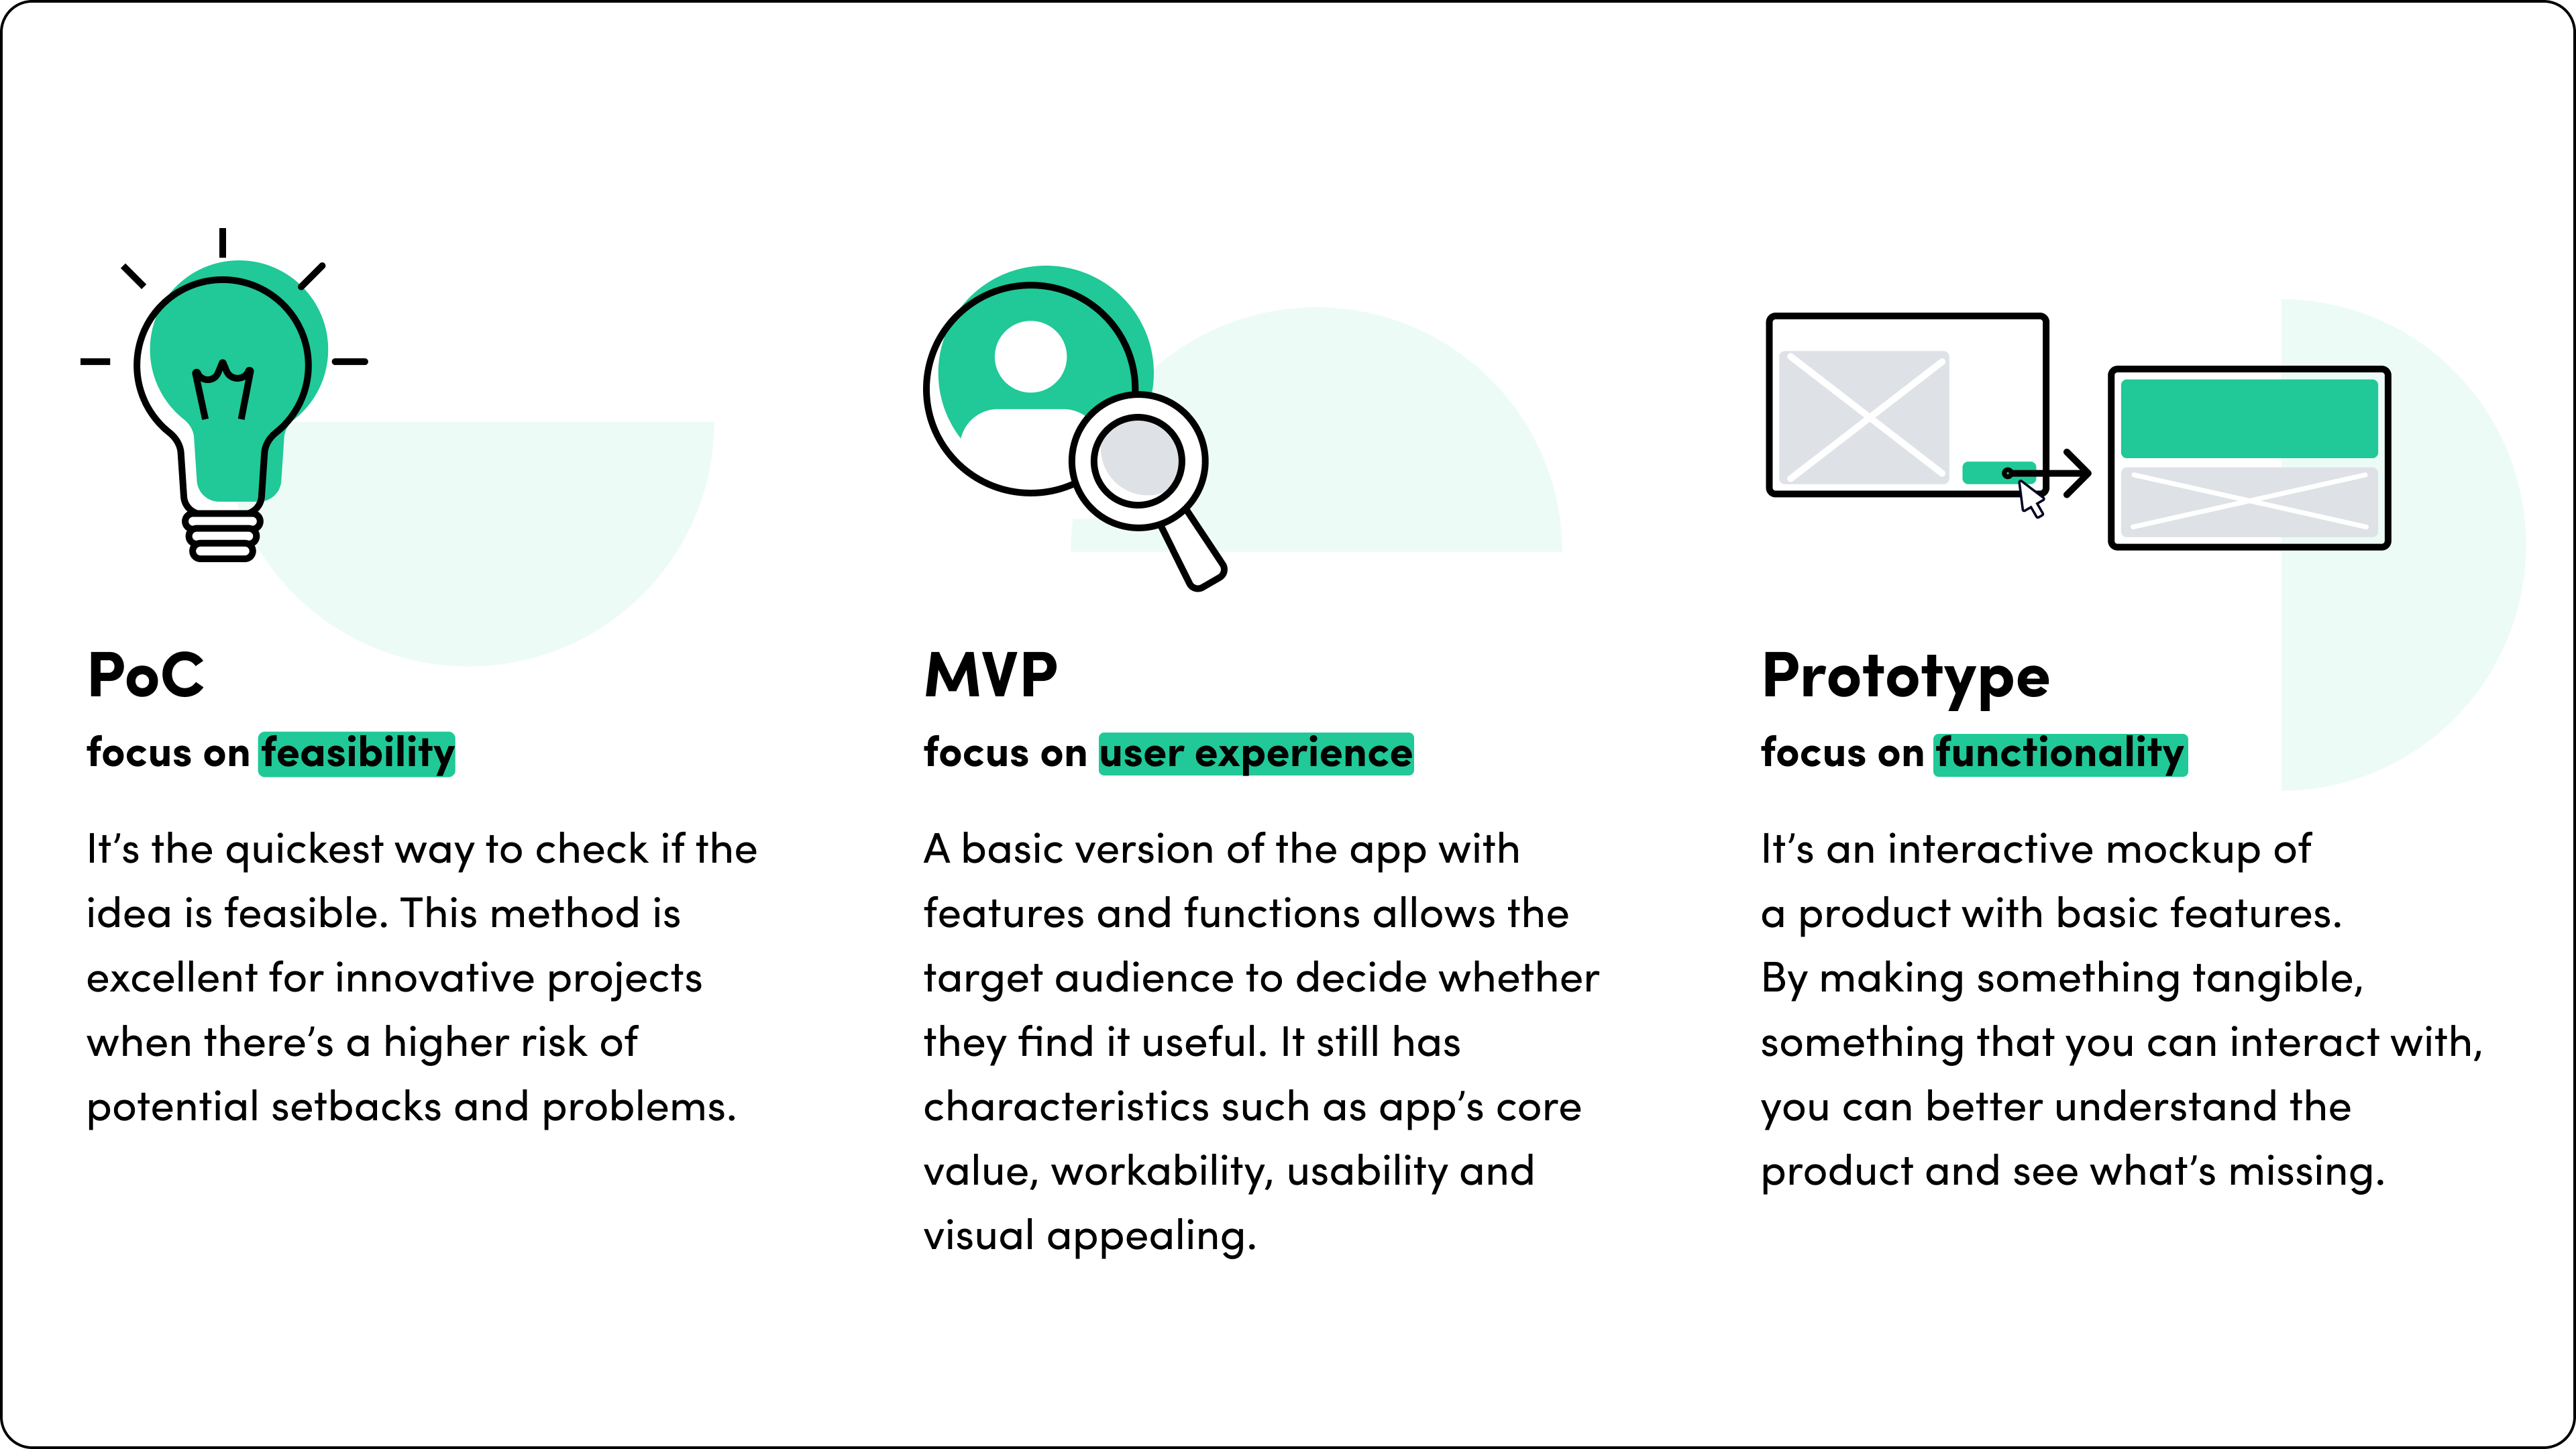 the difference between Proof of-Concept (PoC), Minimal Viable Product (MVP), Prototyping - idea's feasibility, idea's viability, idea's functionality